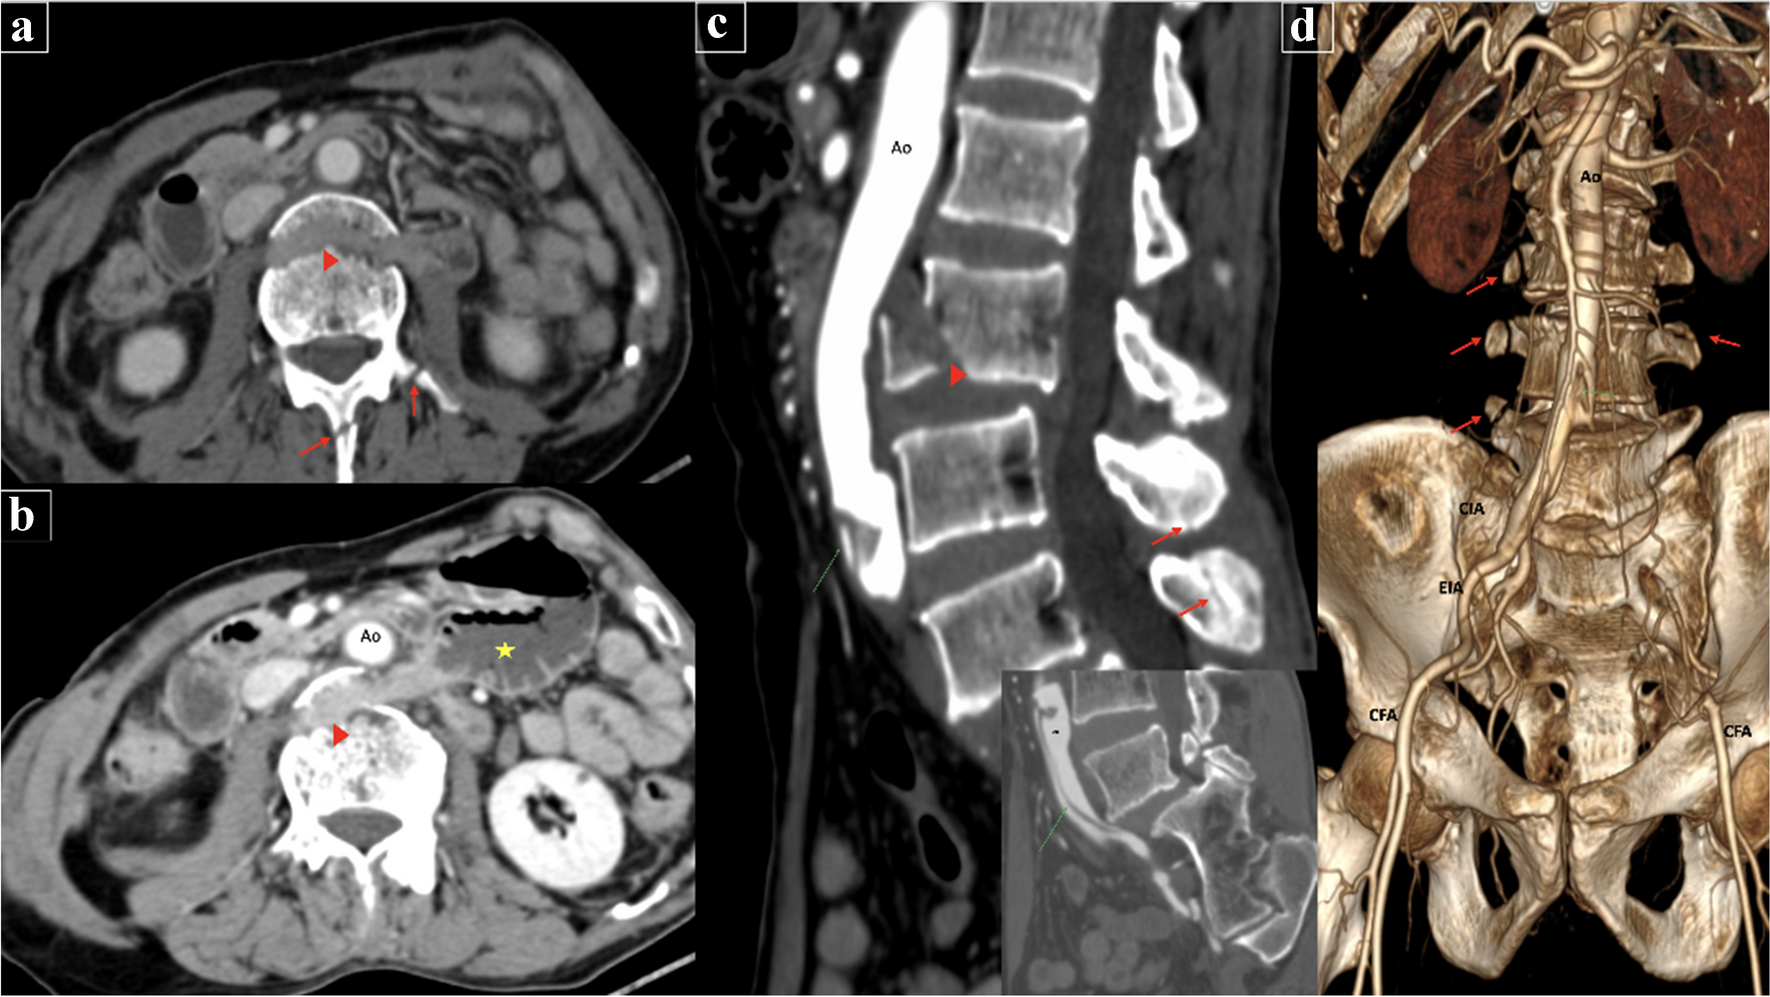 Entrapped bowel within the fractured vertebrae: An extremely rare complication of vertebral fracture